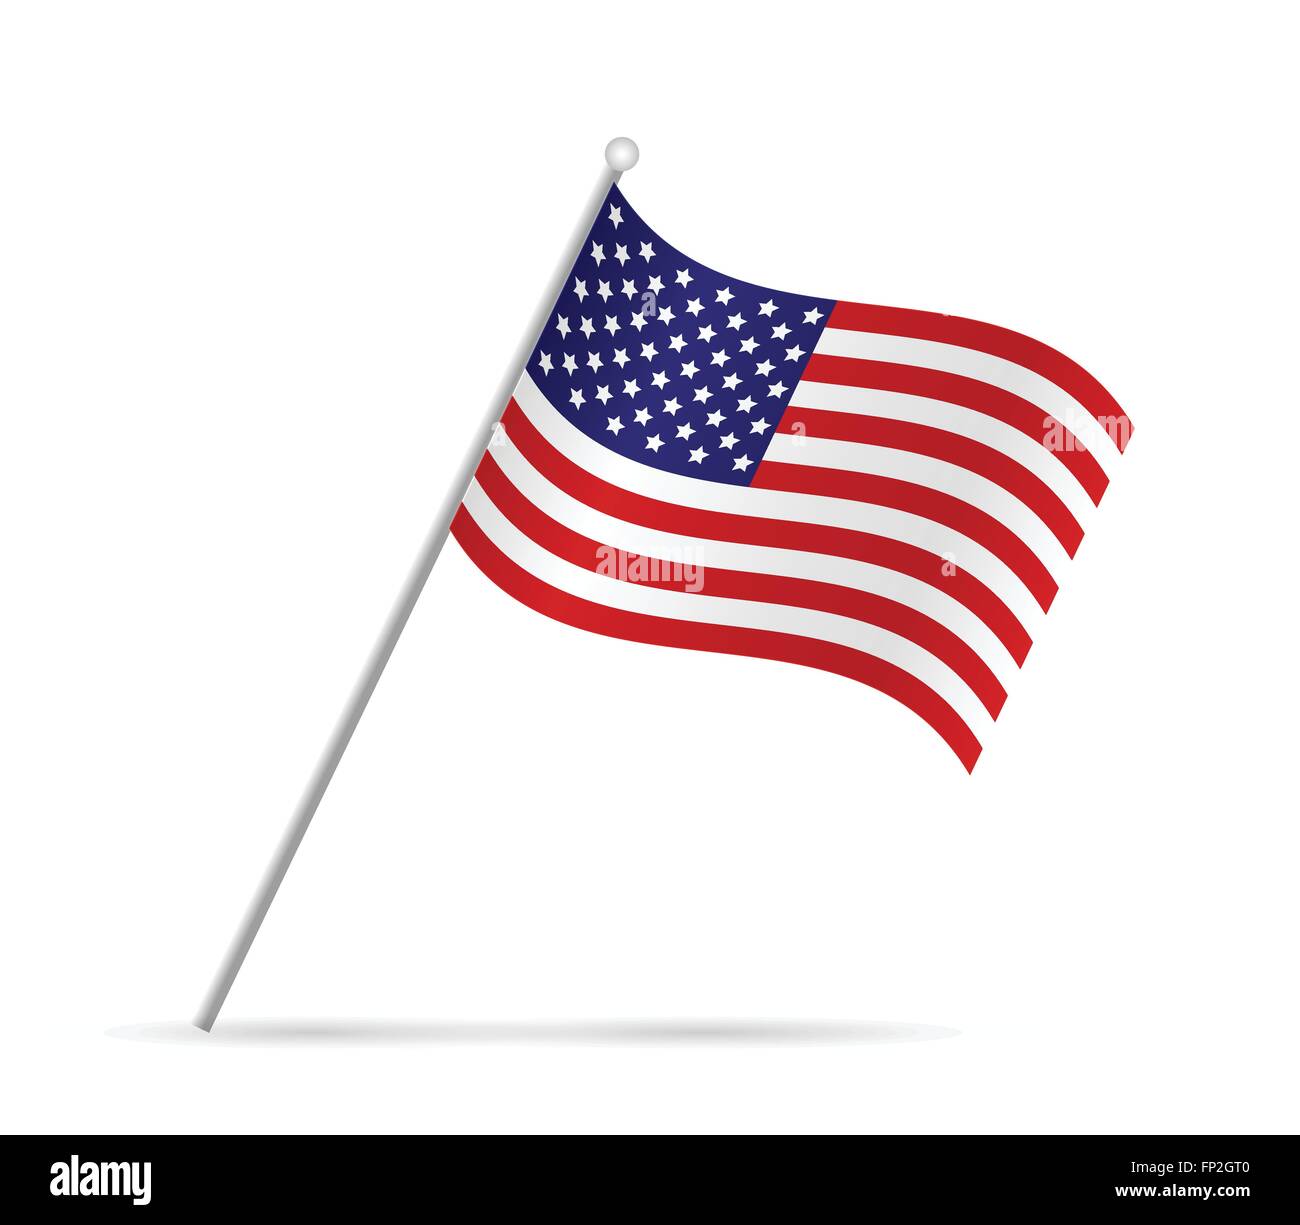 Illustration of a flag from the USA isolated on a white background. Stock Vector